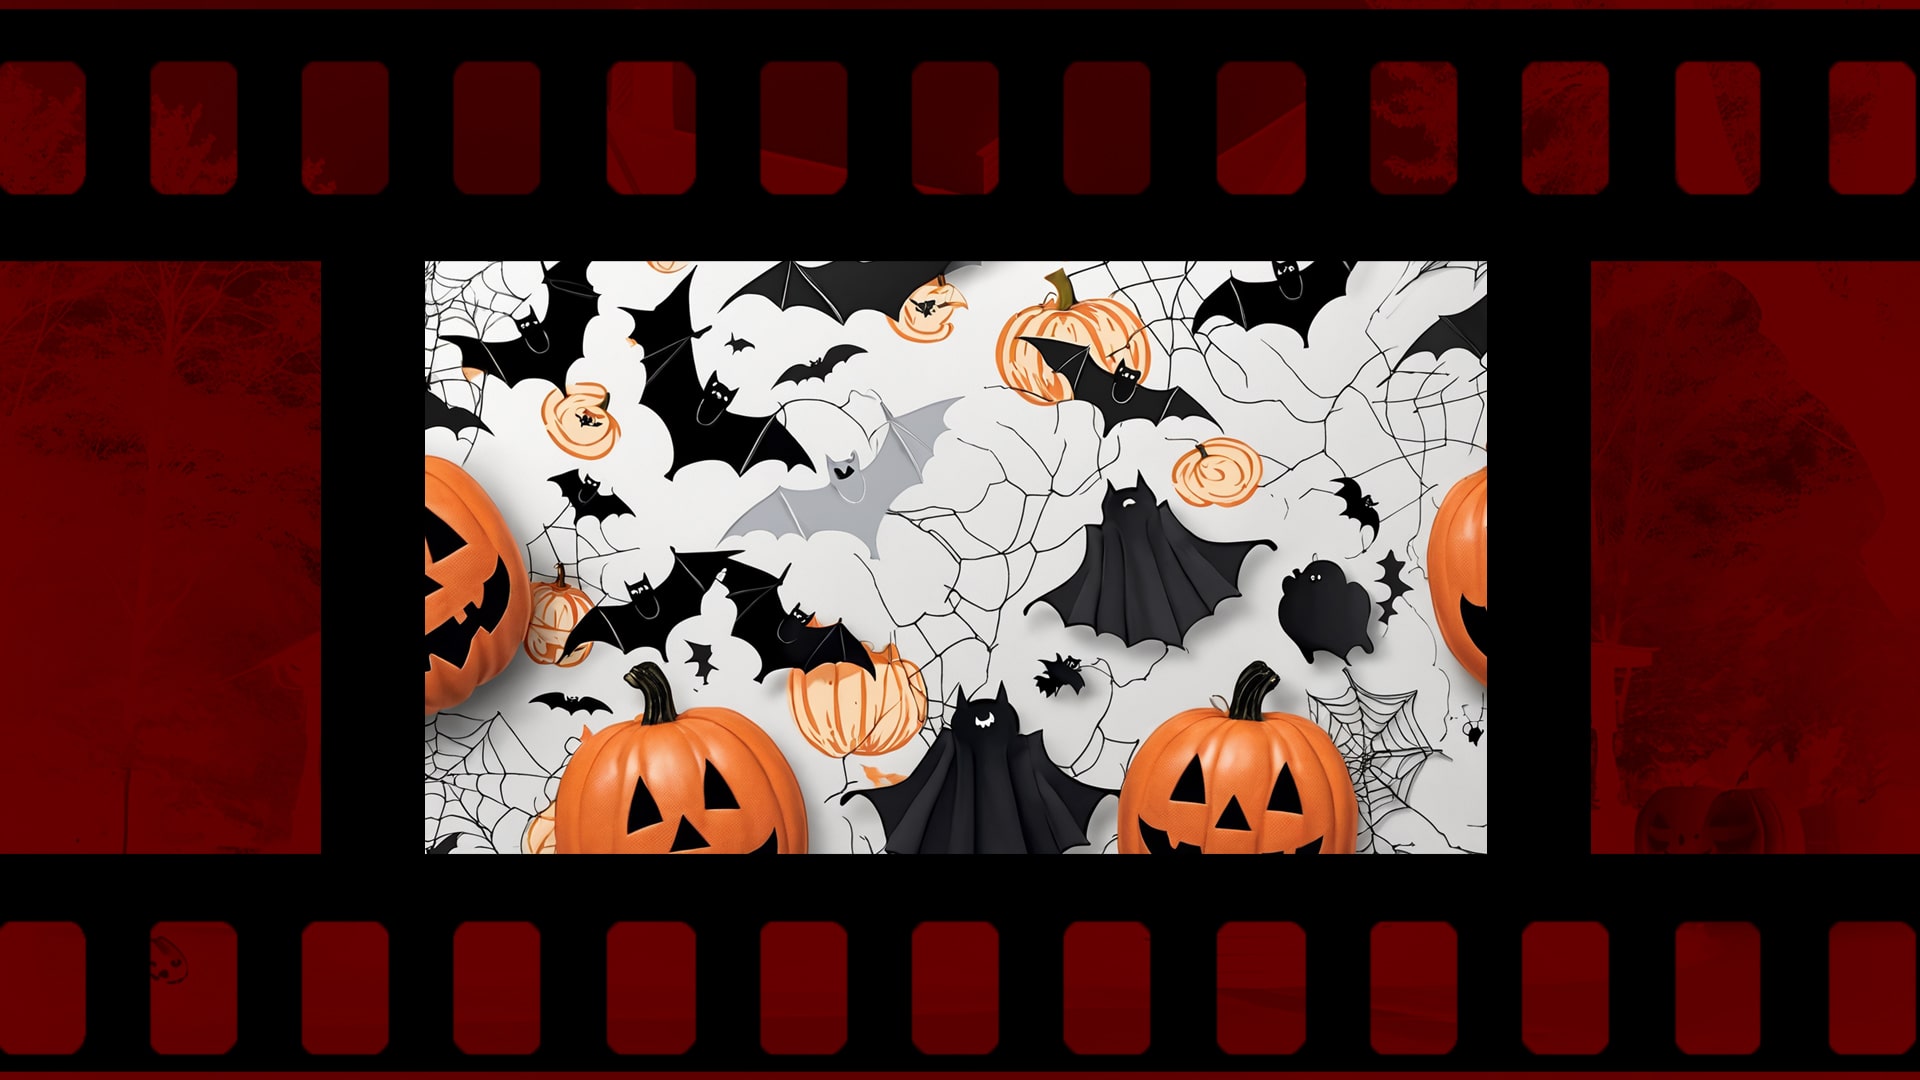 A repeating pattern of bats, pumpkins, ghosts, and witches